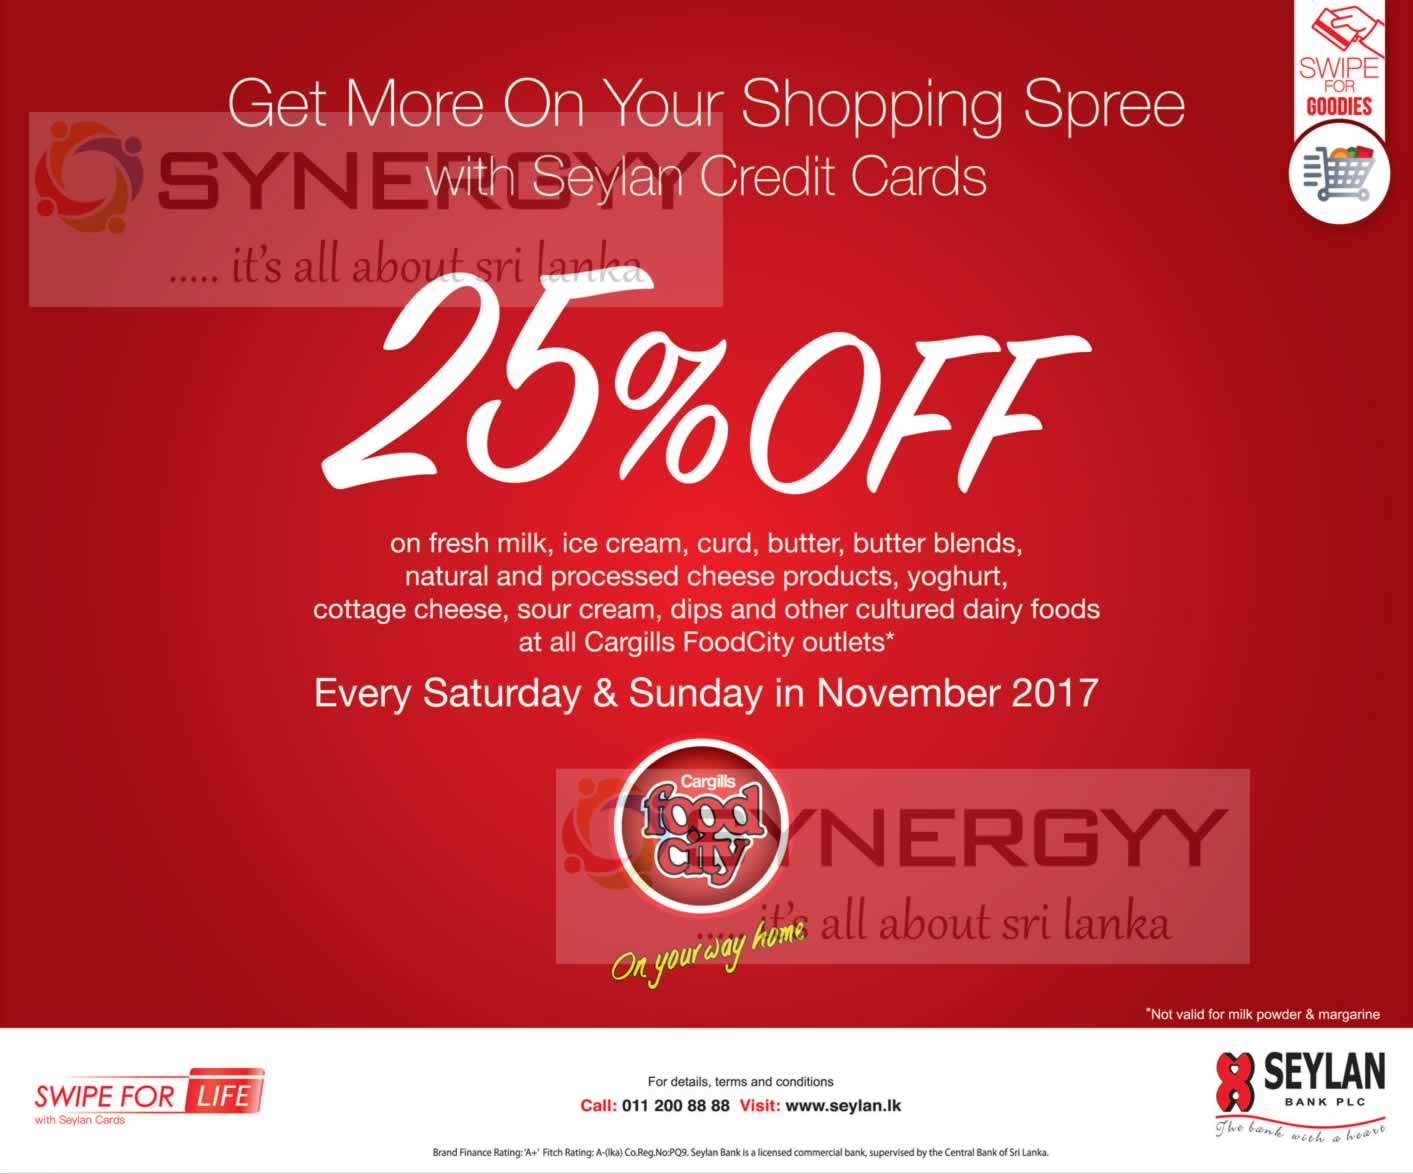 Sampath Bank Credit Card Offers Synergyy